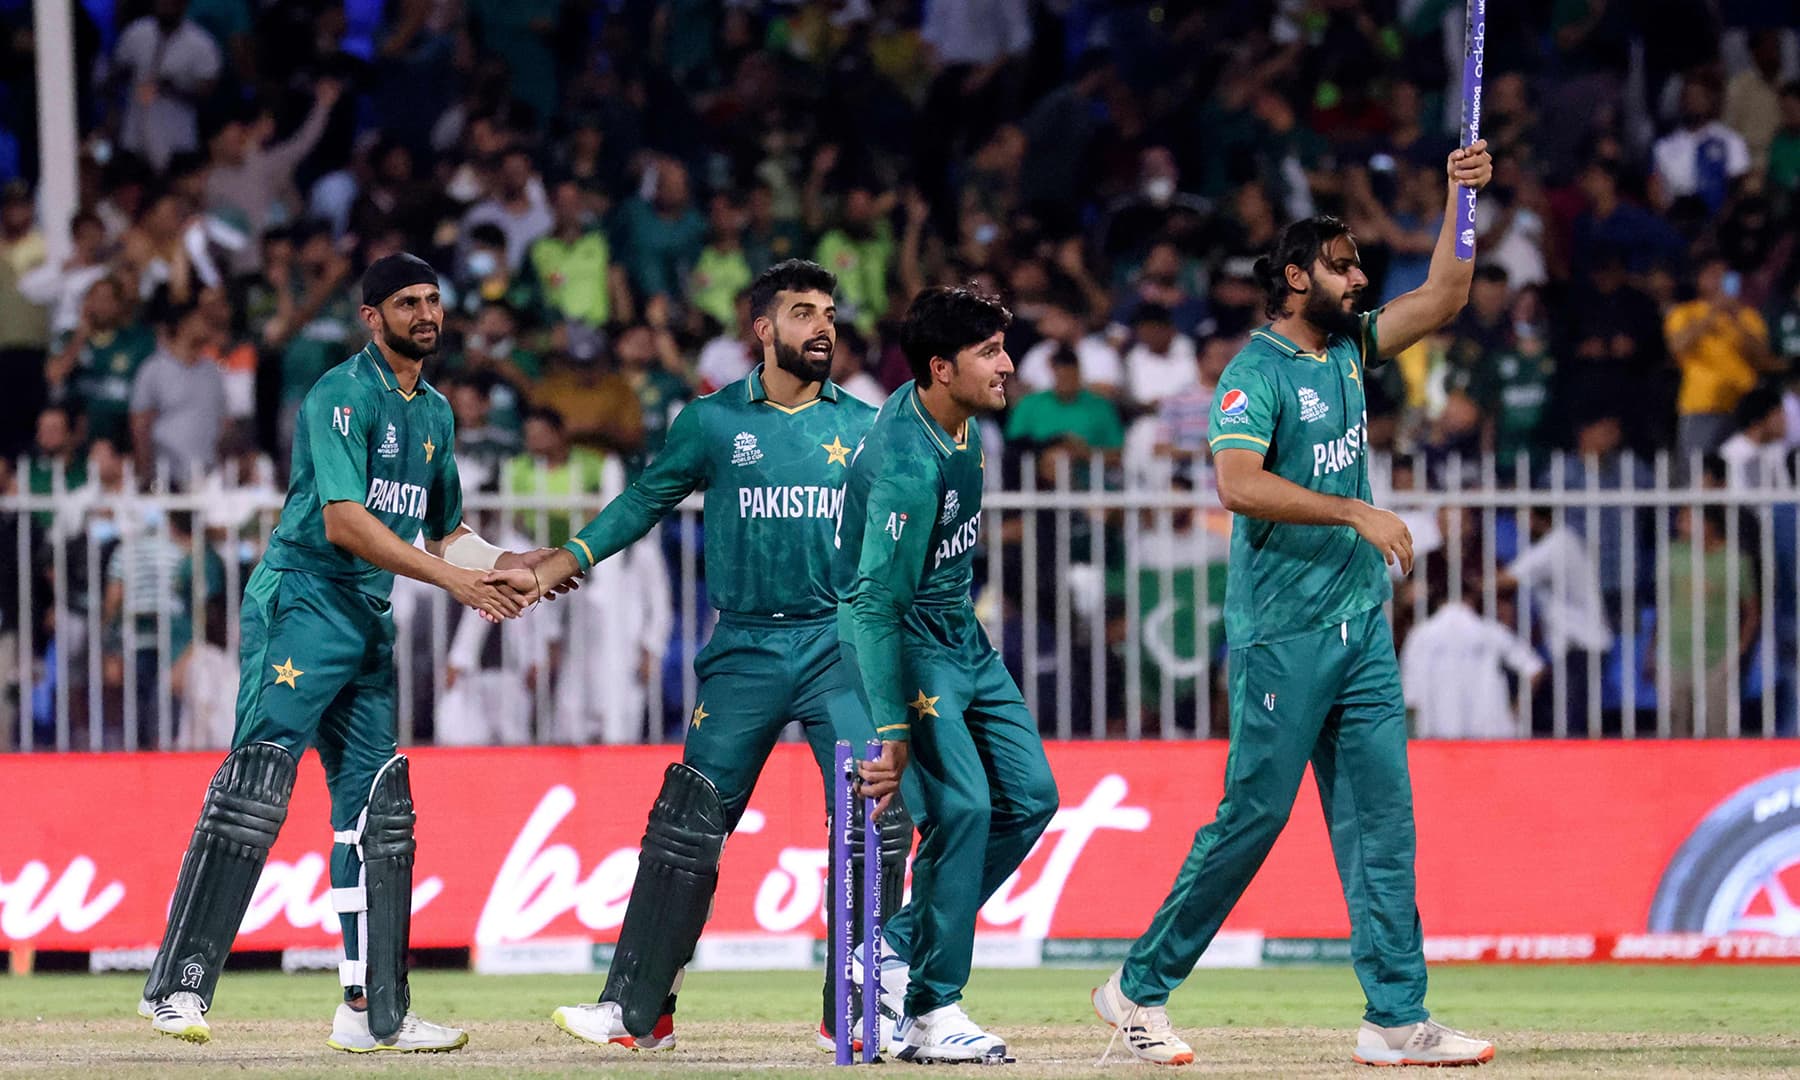 Pakistan gets their second victory beating New Zealand